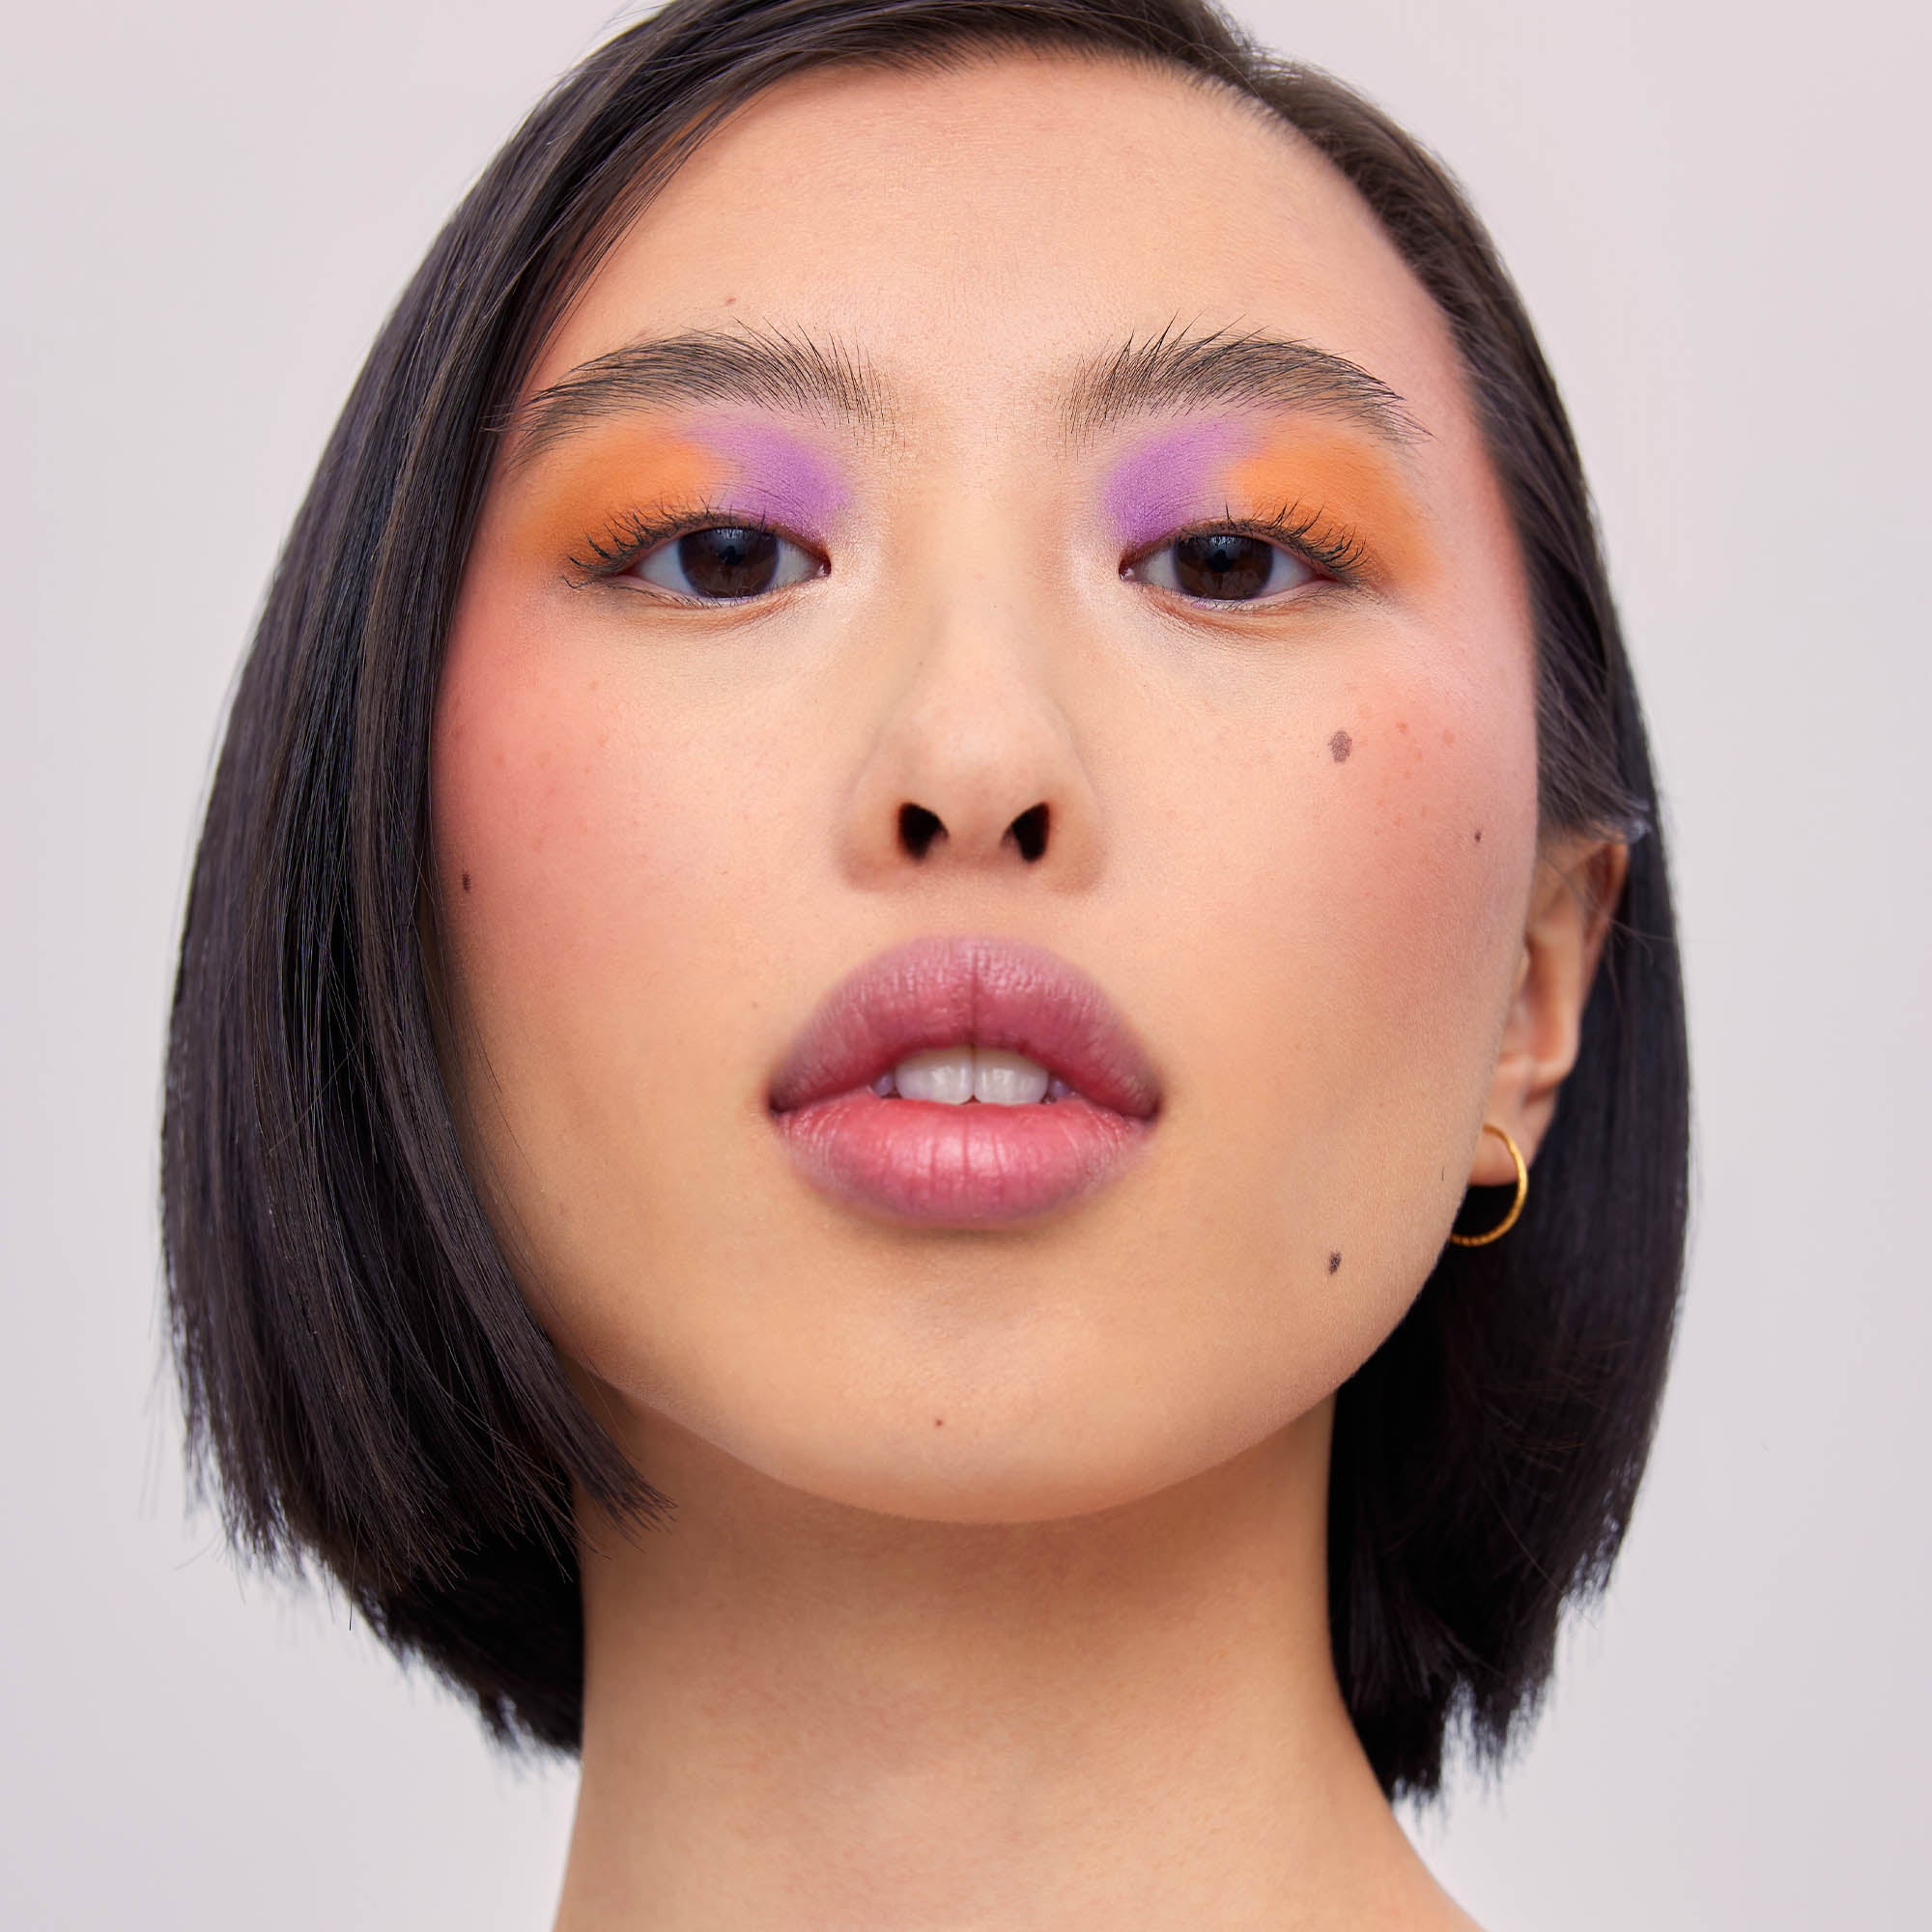 Light skinned Asian young woman with bright purple and orange eyeshadow